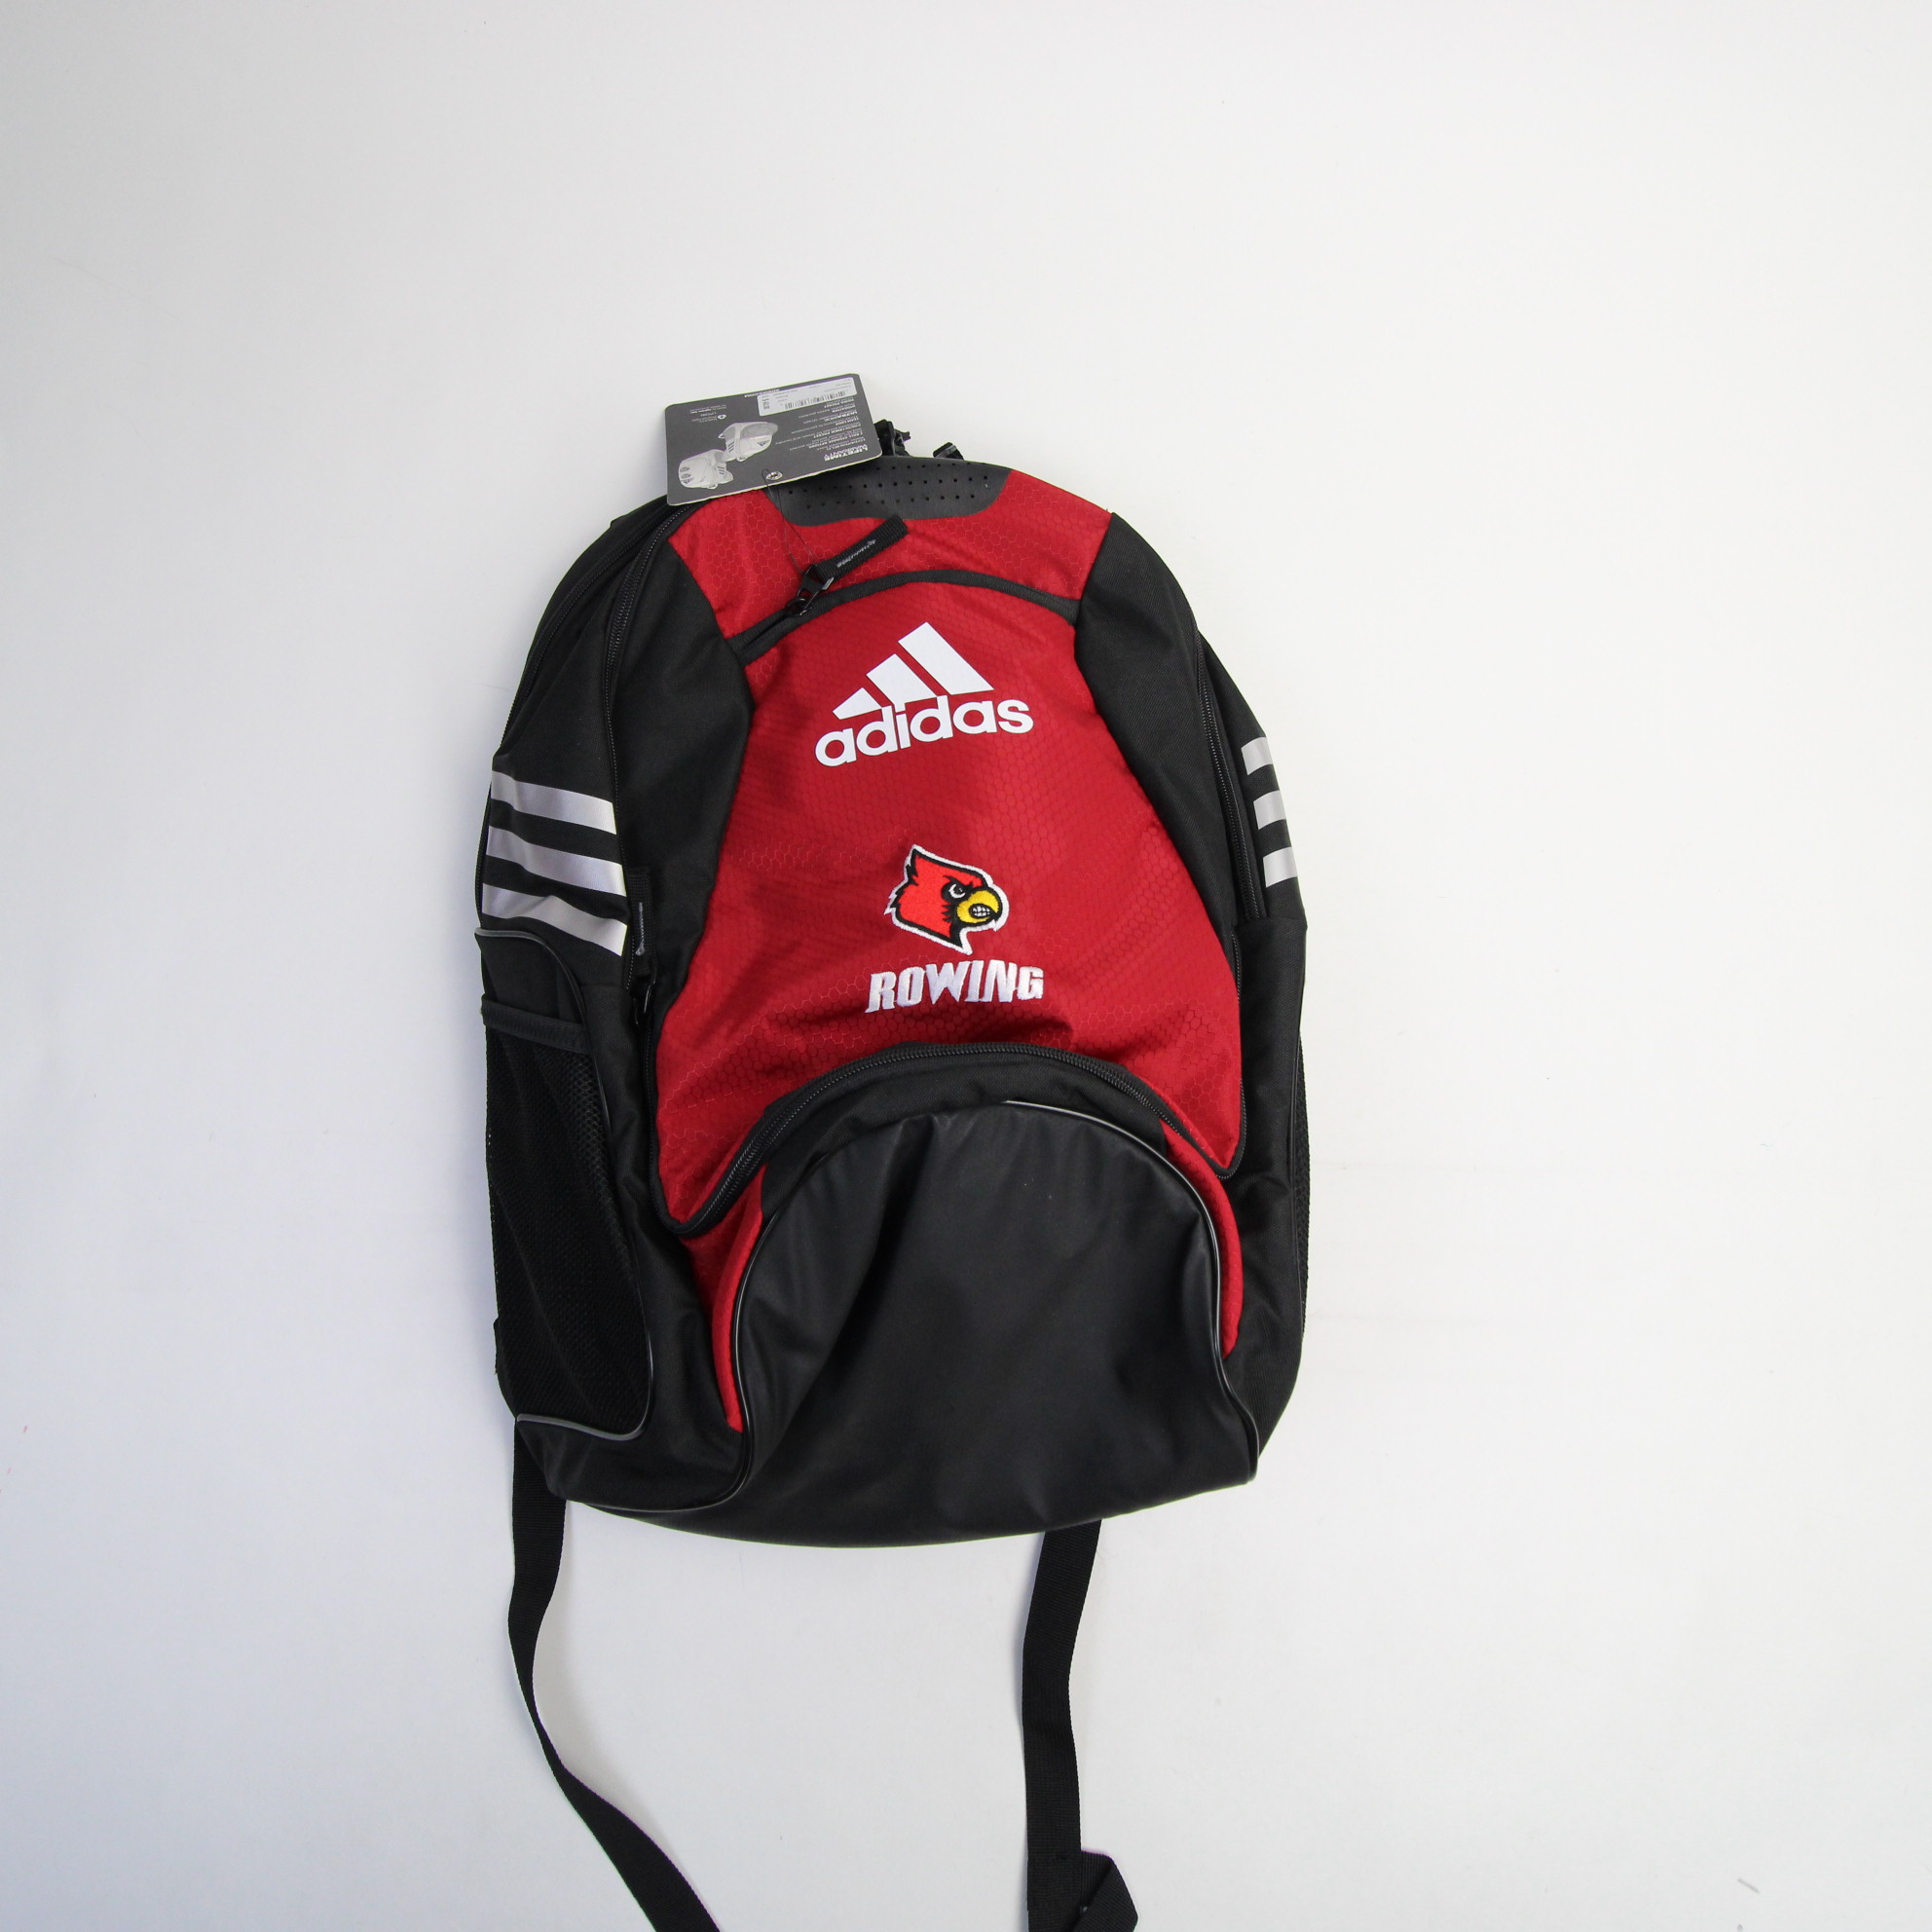 Adidas Louisville Cardinals Soccer backpack Red Black